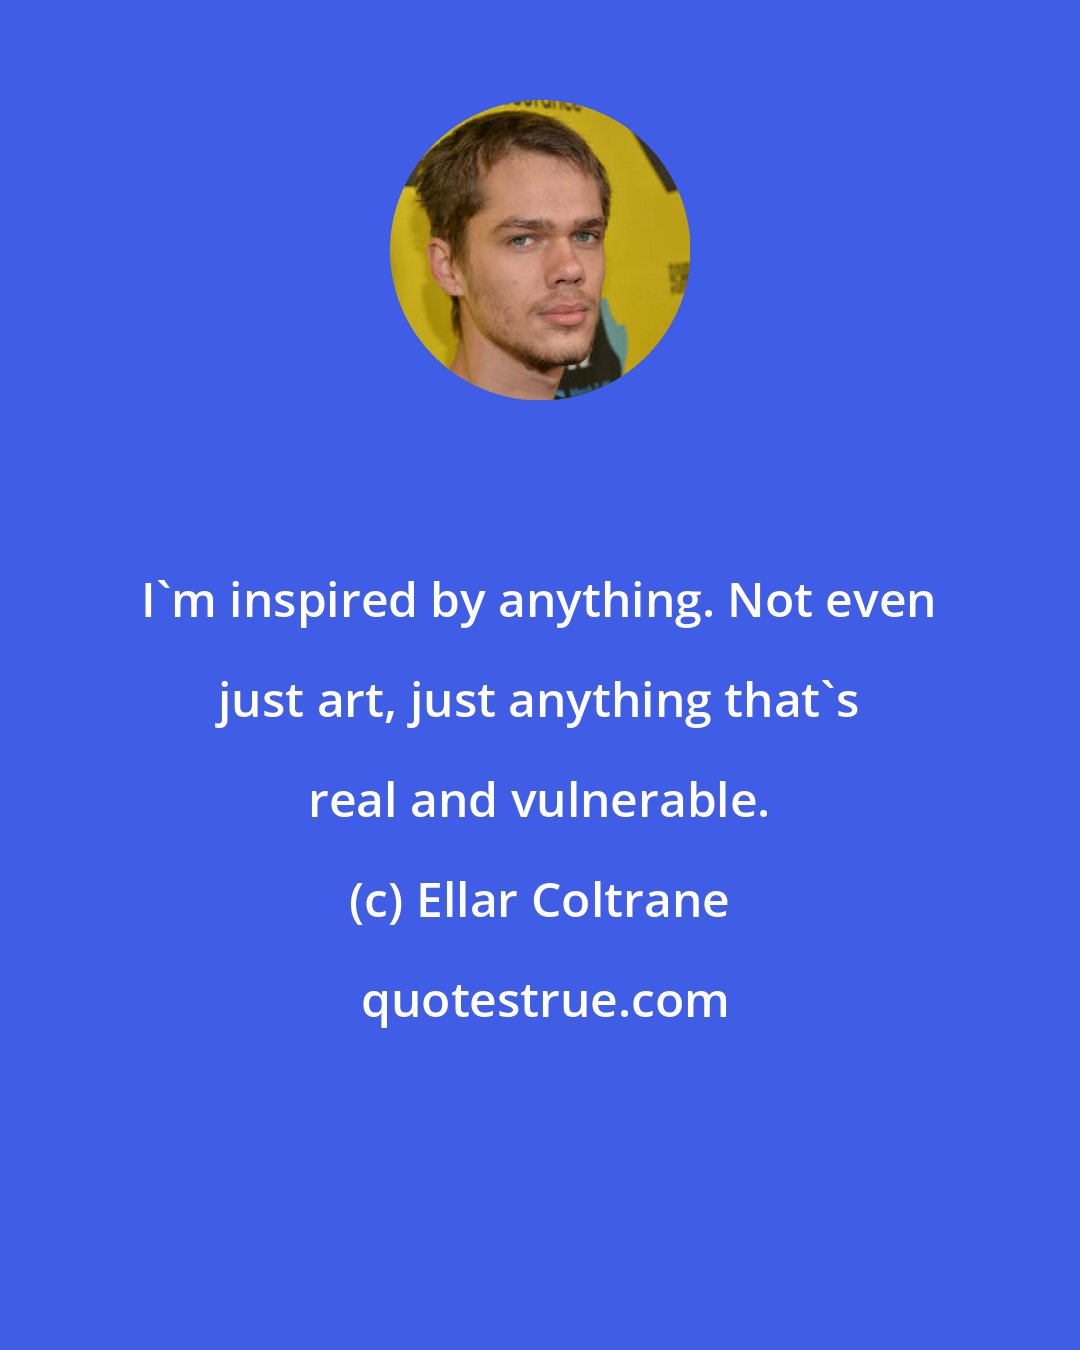 Ellar Coltrane: I'm inspired by anything. Not even just art, just anything that's real and vulnerable.